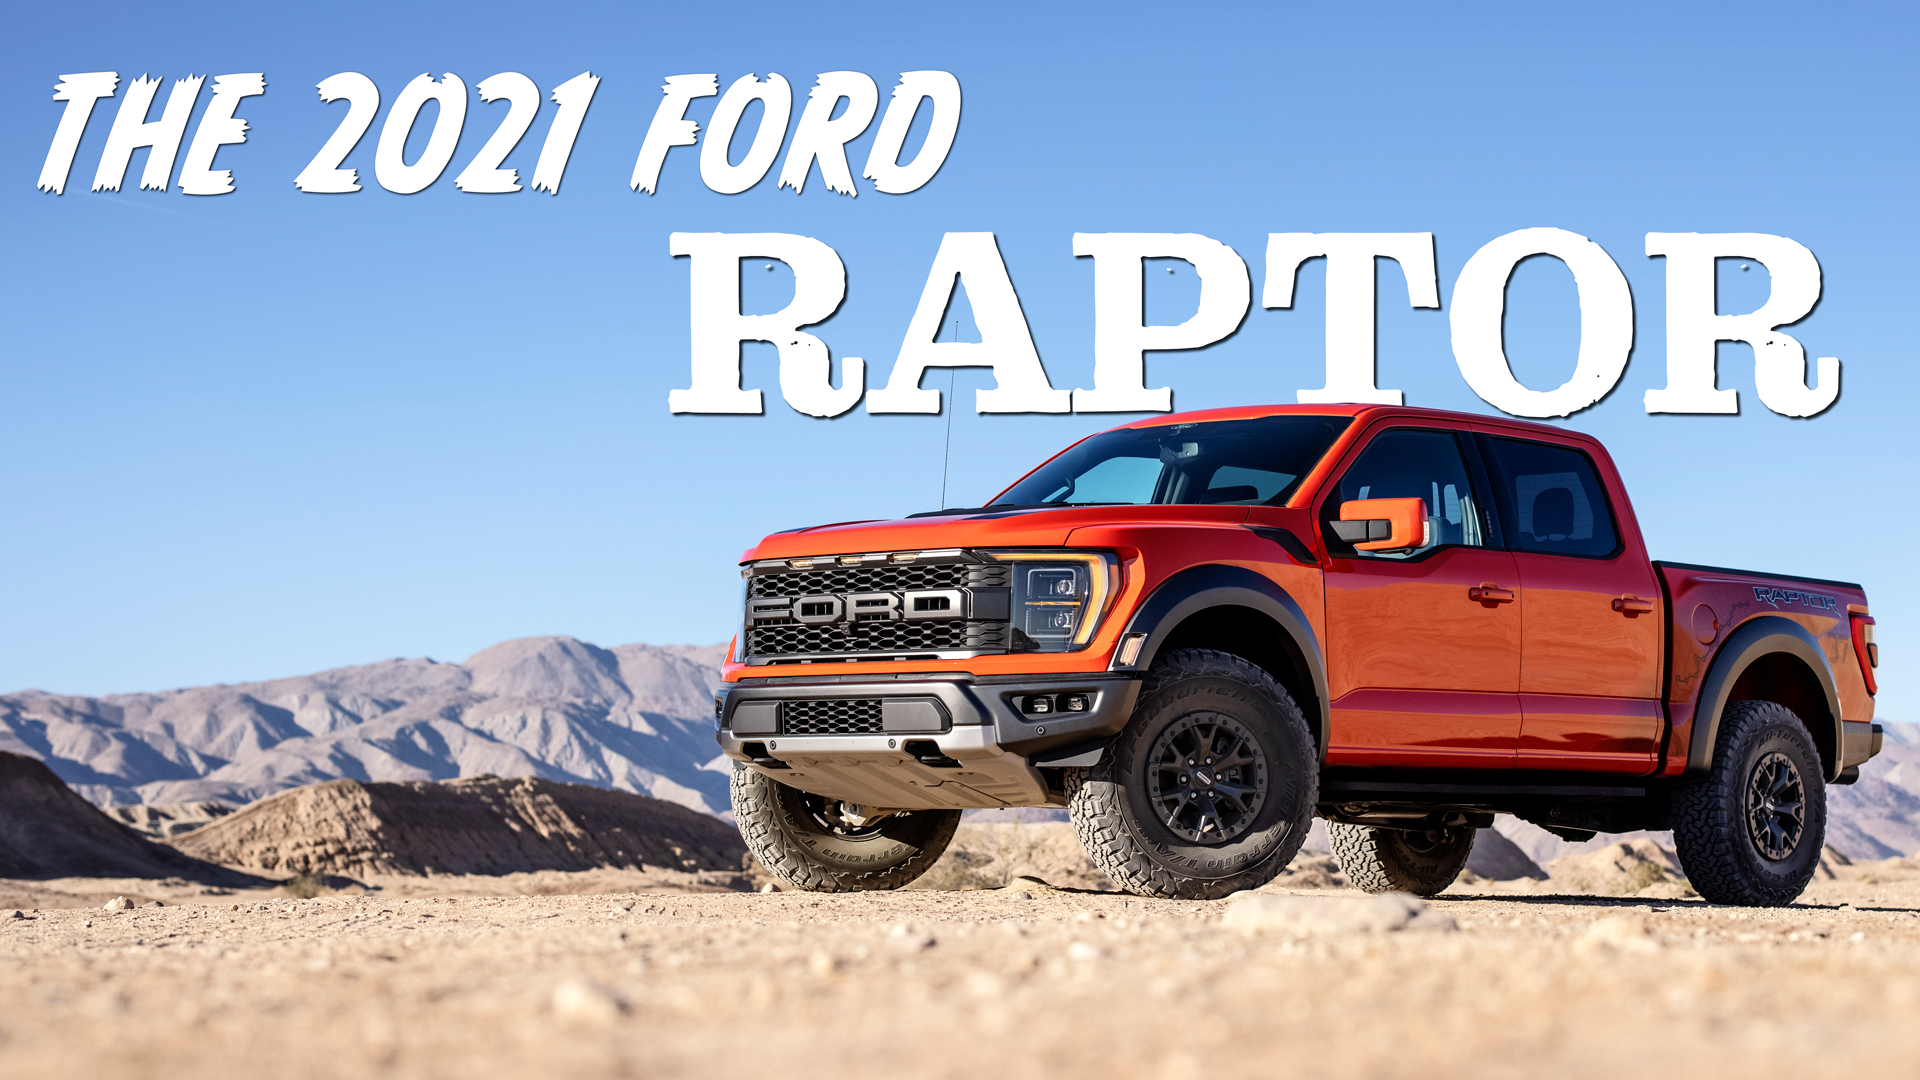 2021 ford raptor is all new